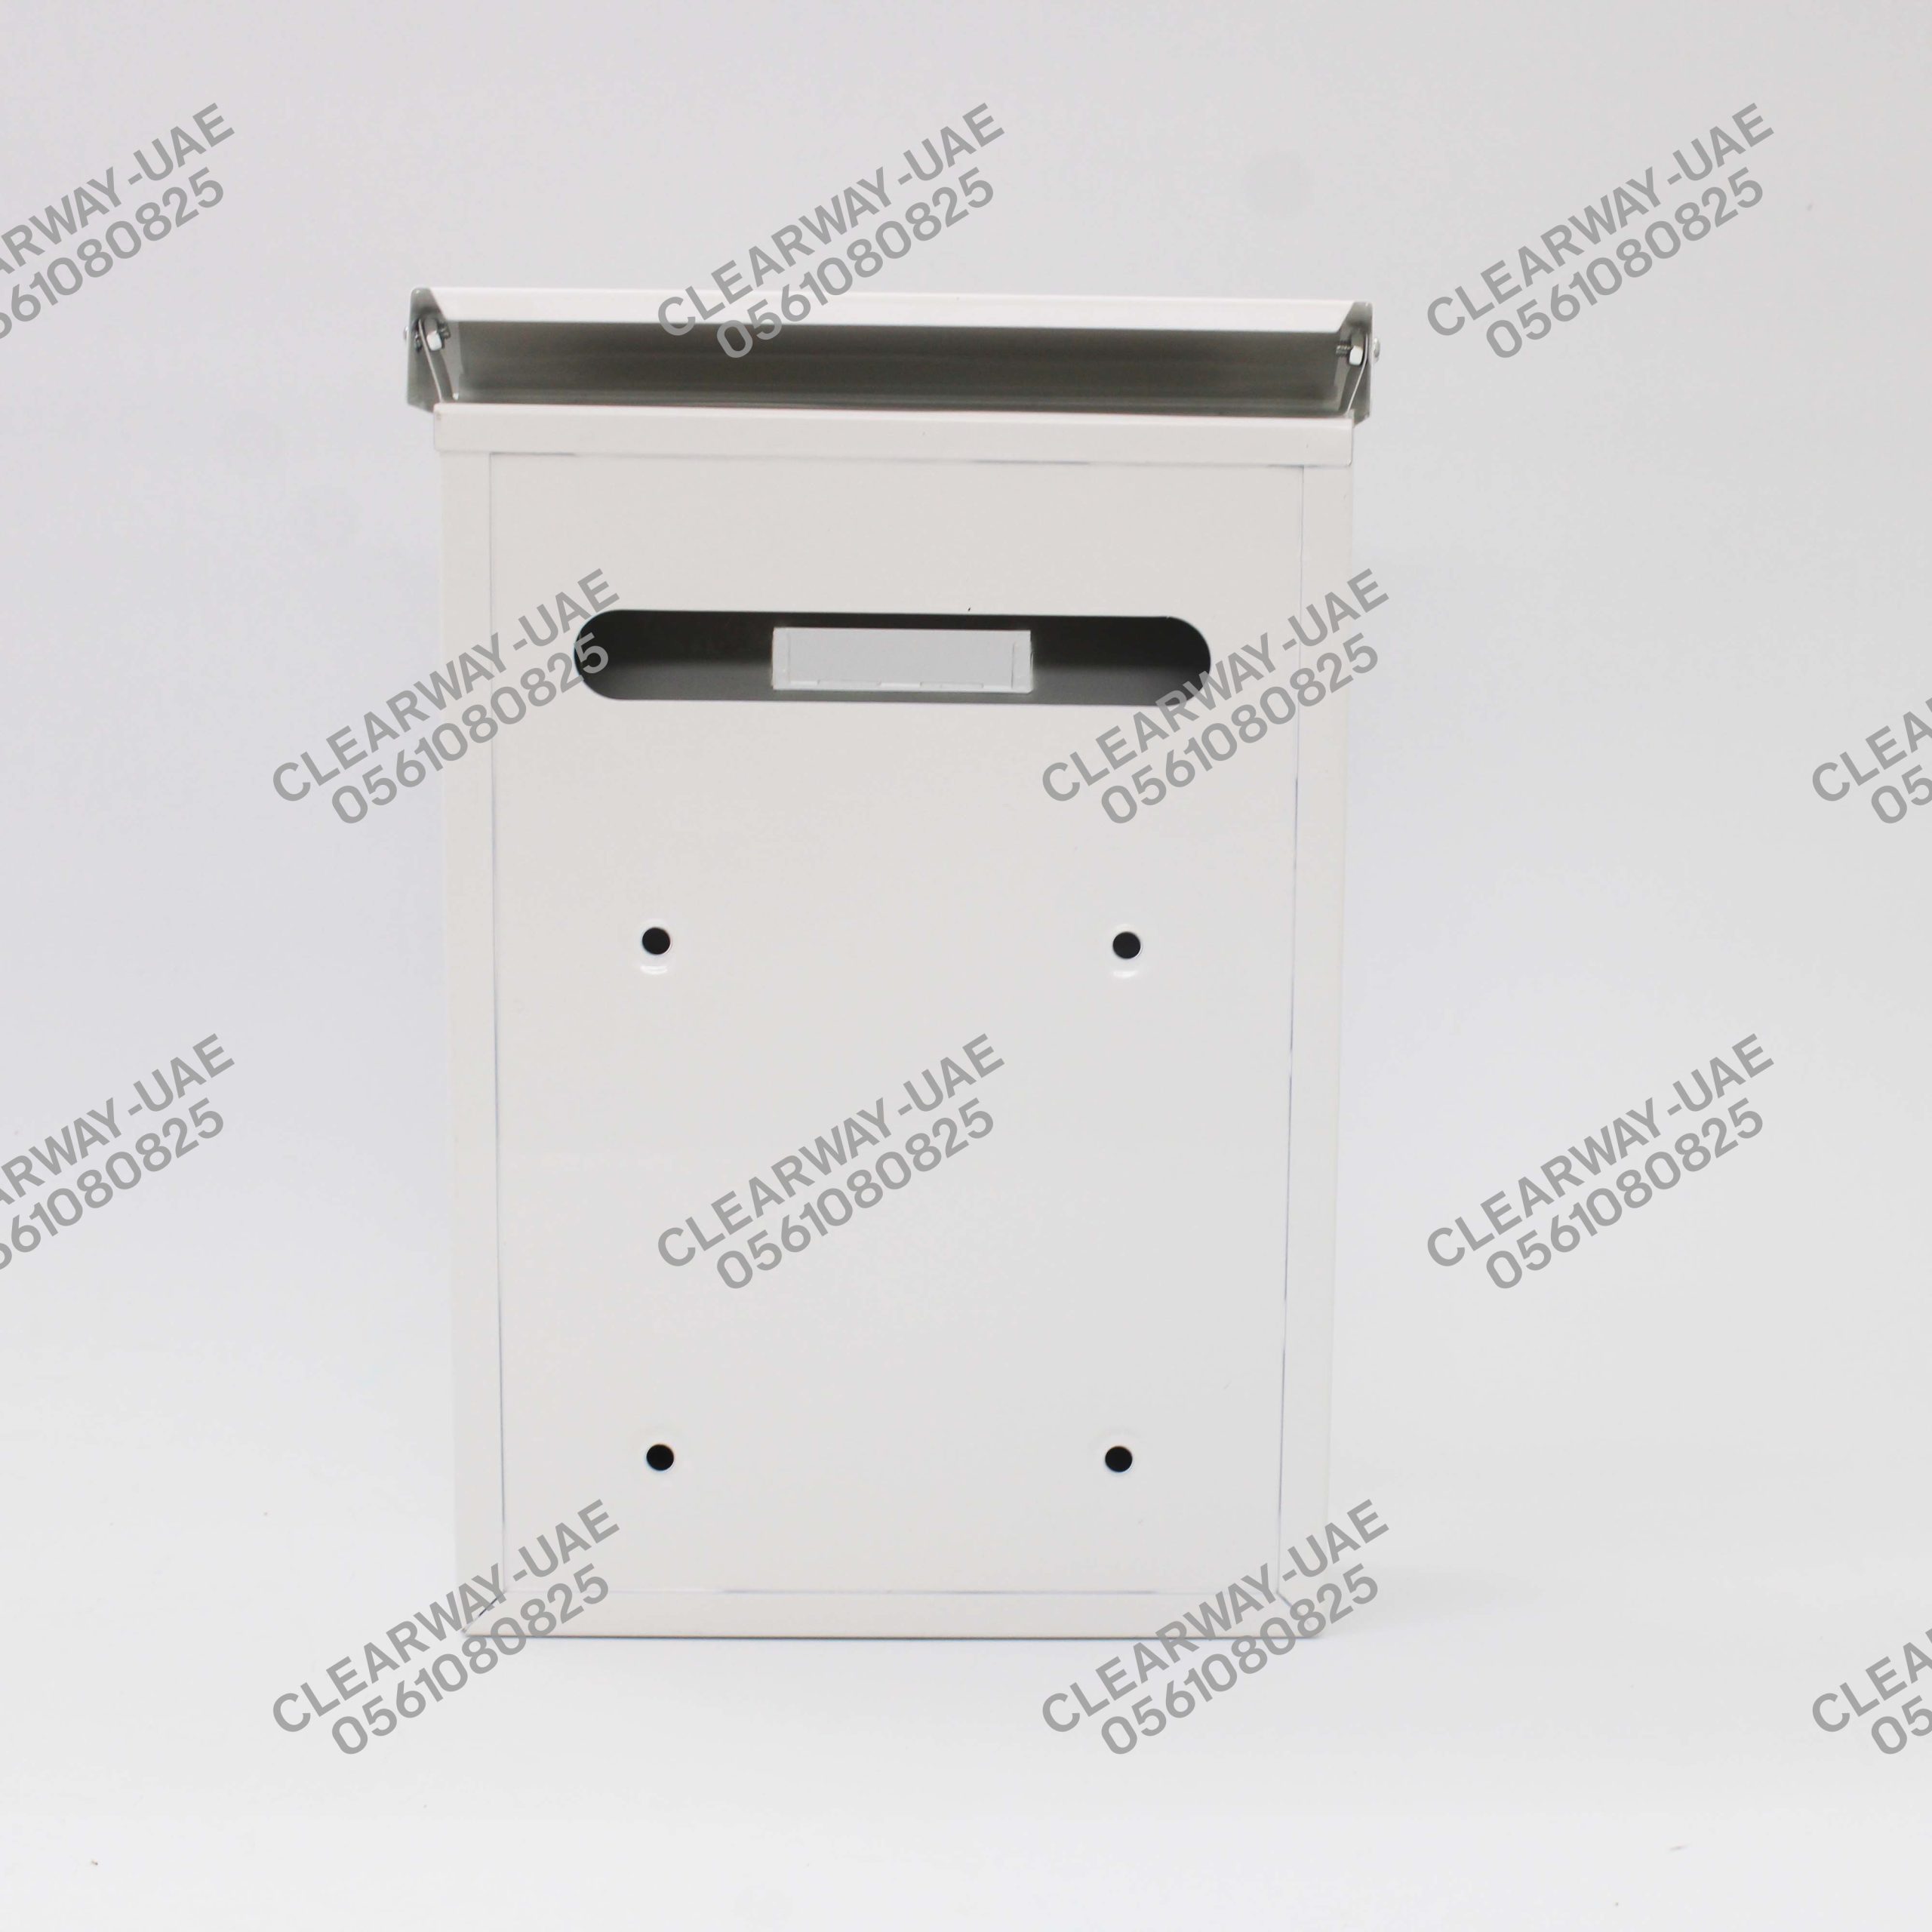 METAL LETTER BOX SMALL SUPPLIER UAE CLEARWAY RYXO SAFETY11